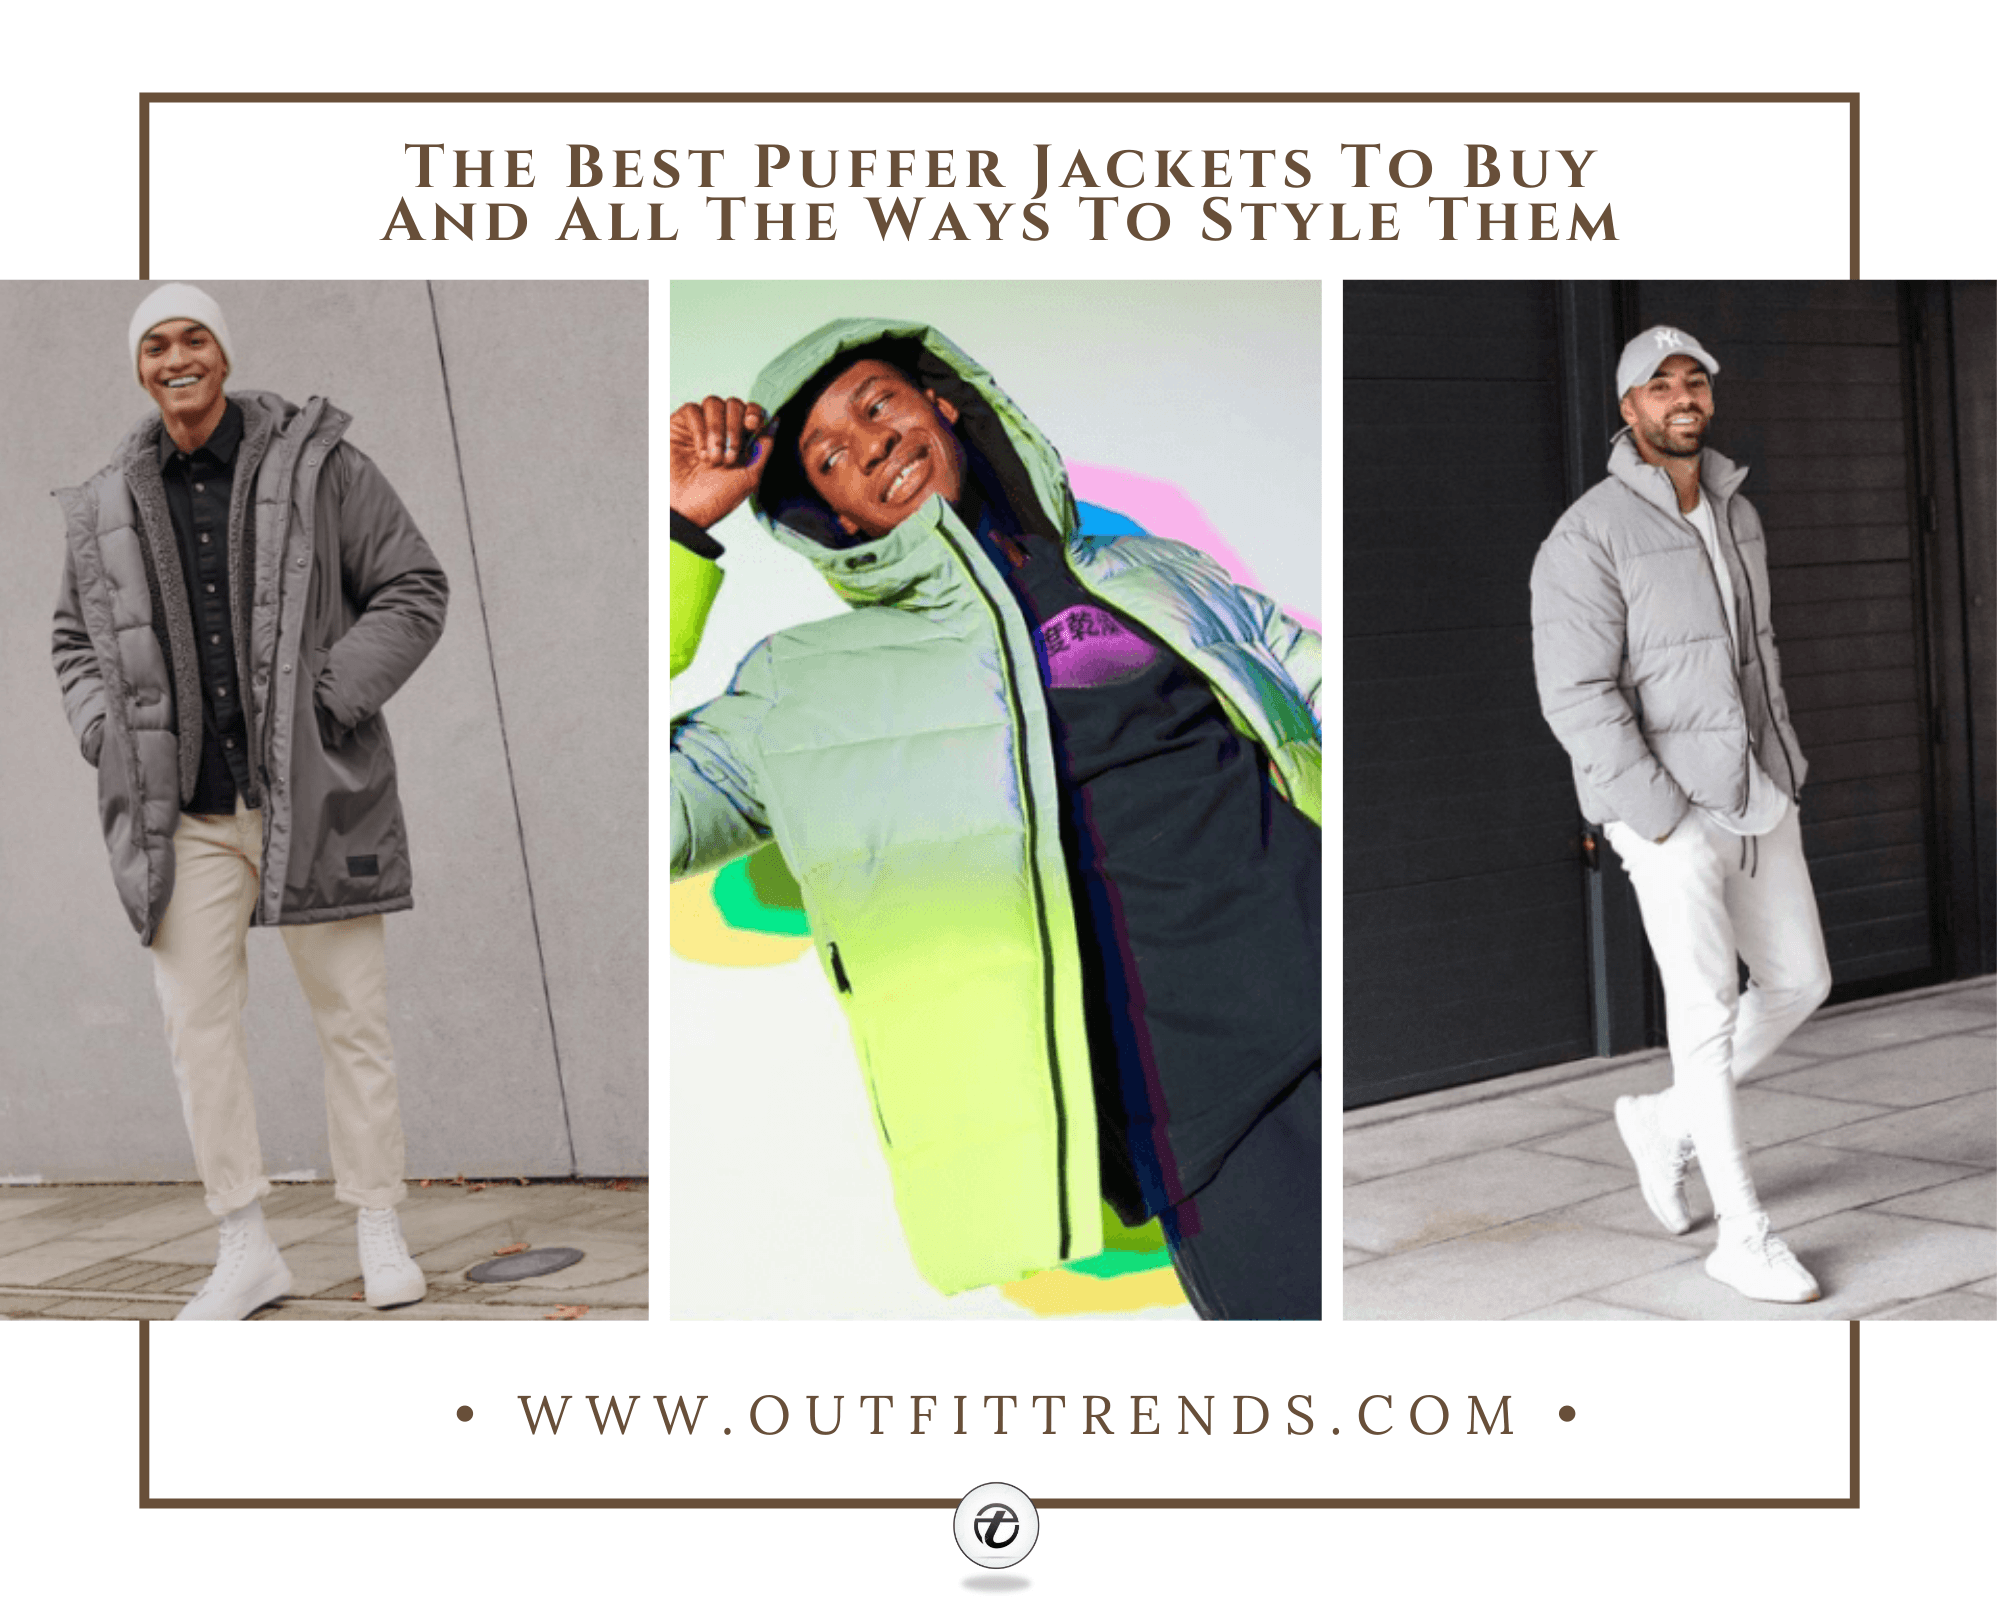 25 Stylish Puffer Jacket Outfit Ideas For Men